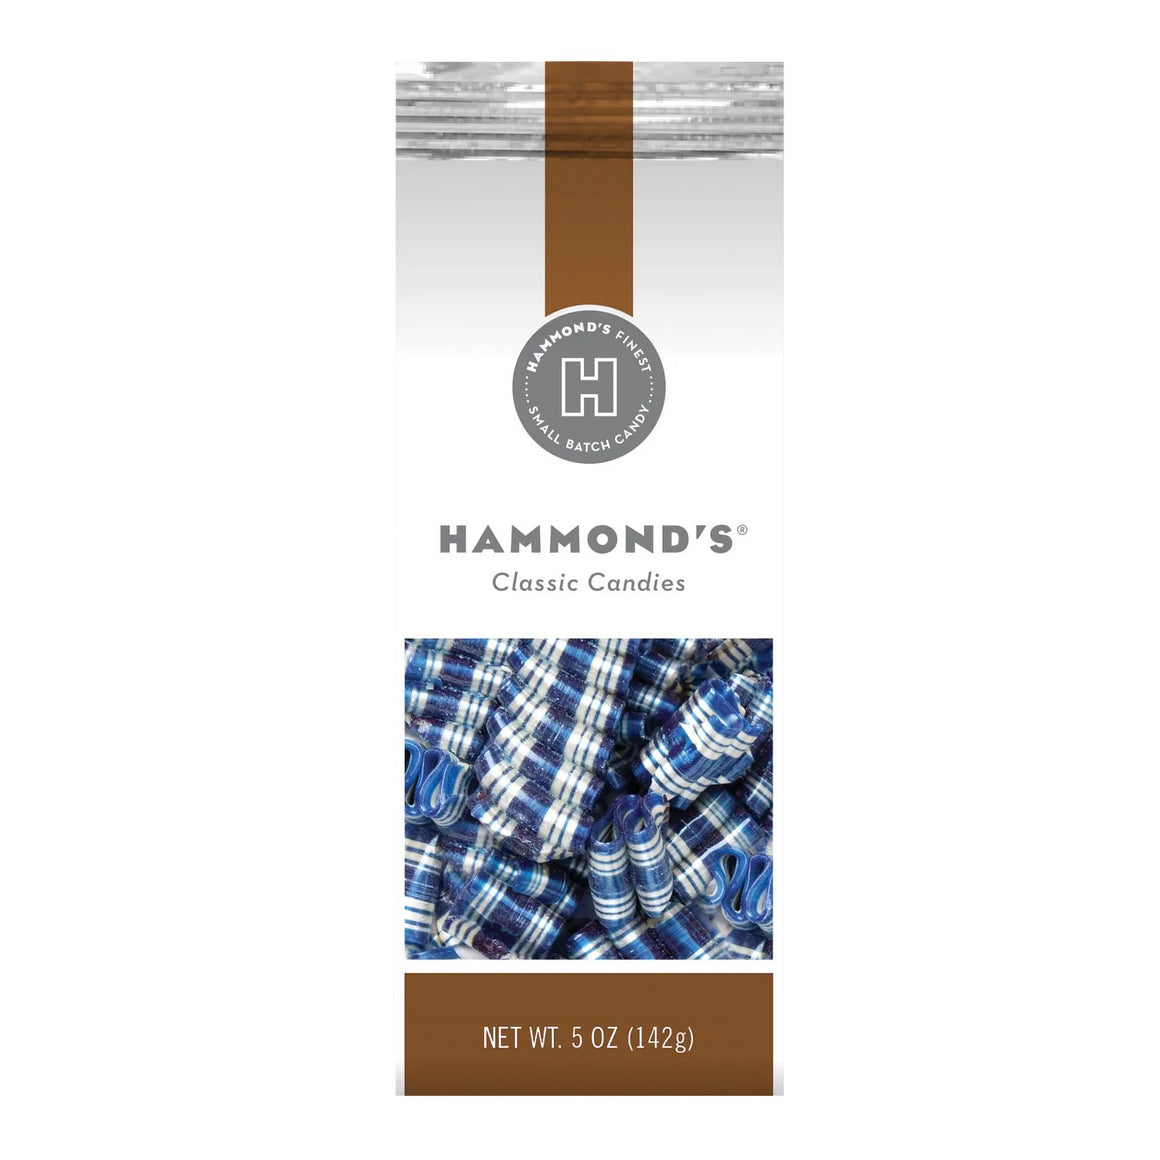 All City Candy Hammond's Mini Ribbon Blue Raspberry 5 oz. Bag Hard Hammonds Candy For fresh candy and great service, visit www.allcitycandy.com